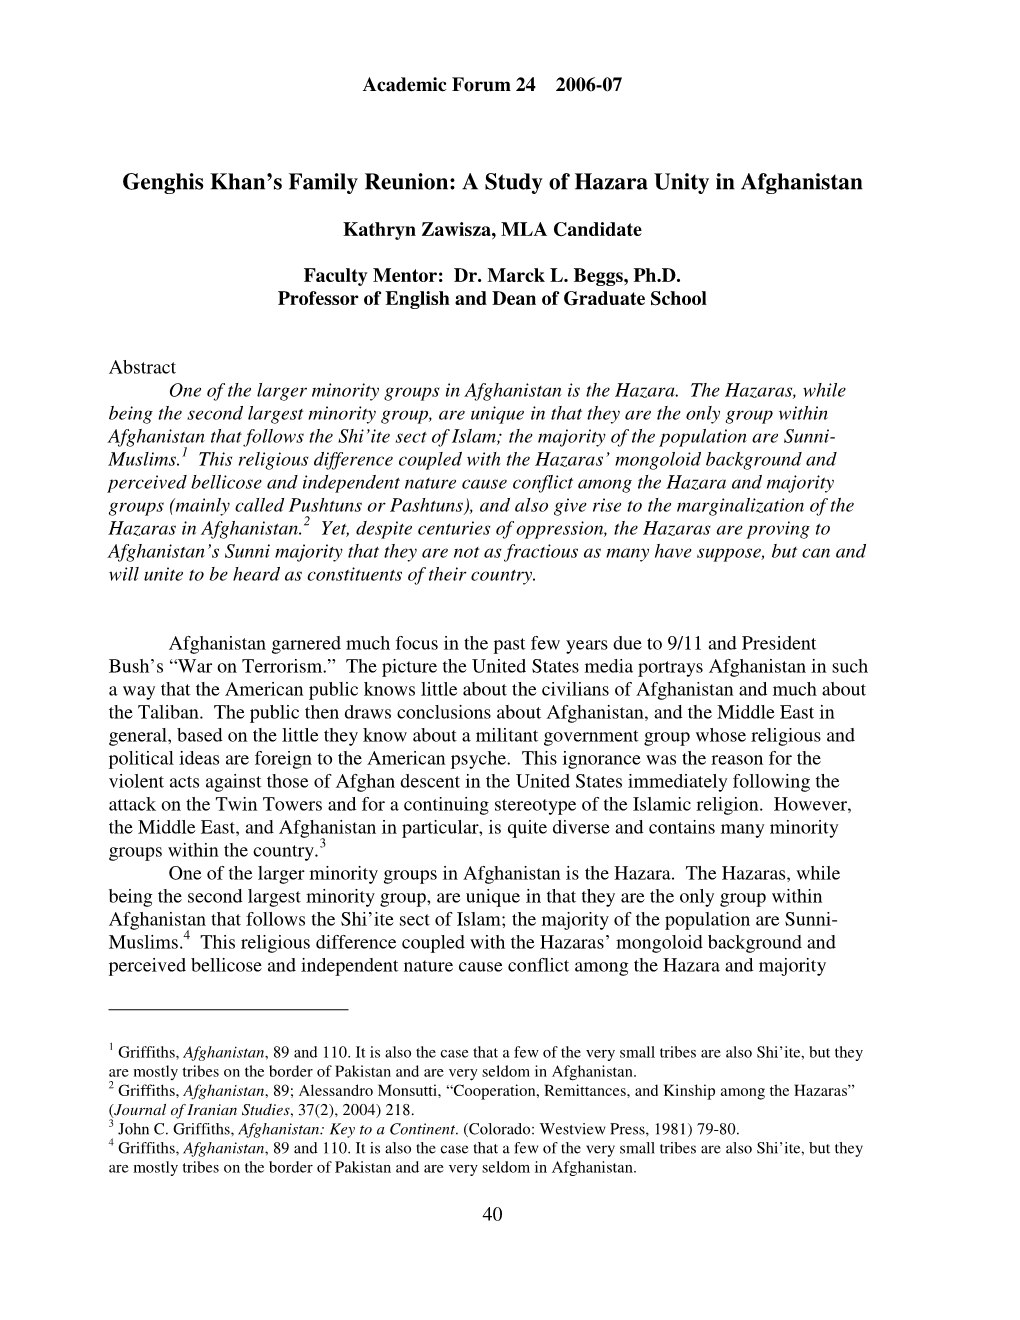 Genghis Khan's Family Reunion: a Study of Hazara Unity in Afghanistan